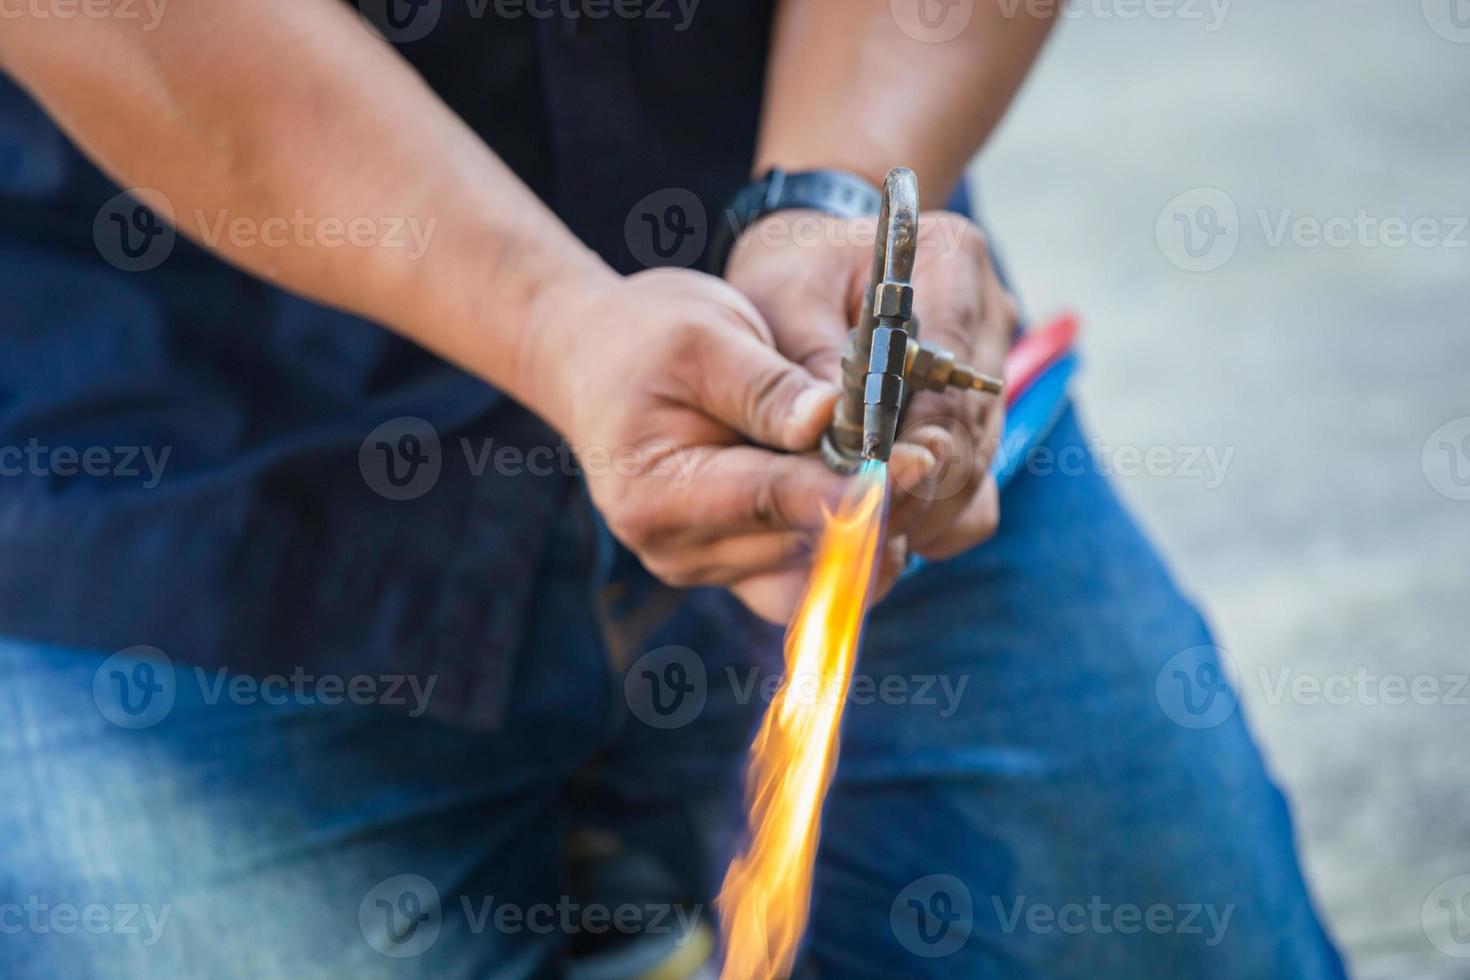 Air conditioning repair man use fuel gases and oxygen to weld or cut metals, Oxy-fuel welding and oxy-fuel cutting processes, repairman on the floor fixing air conditioning system photo